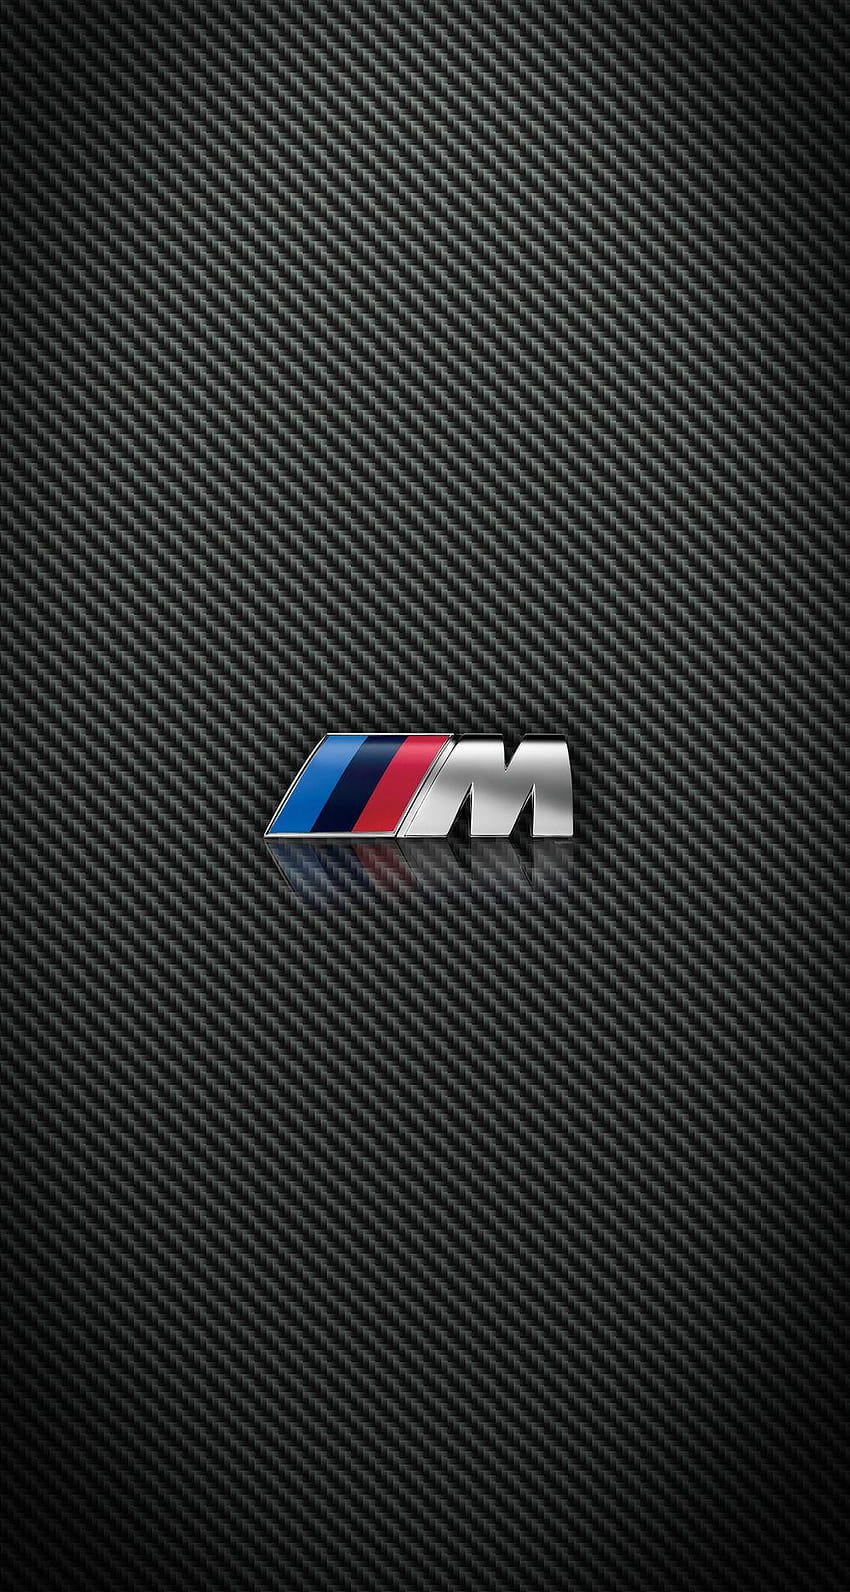 Carbon Fiber BMW and M Power iPhone for iPhone 6 Plus HD phone wallpaper